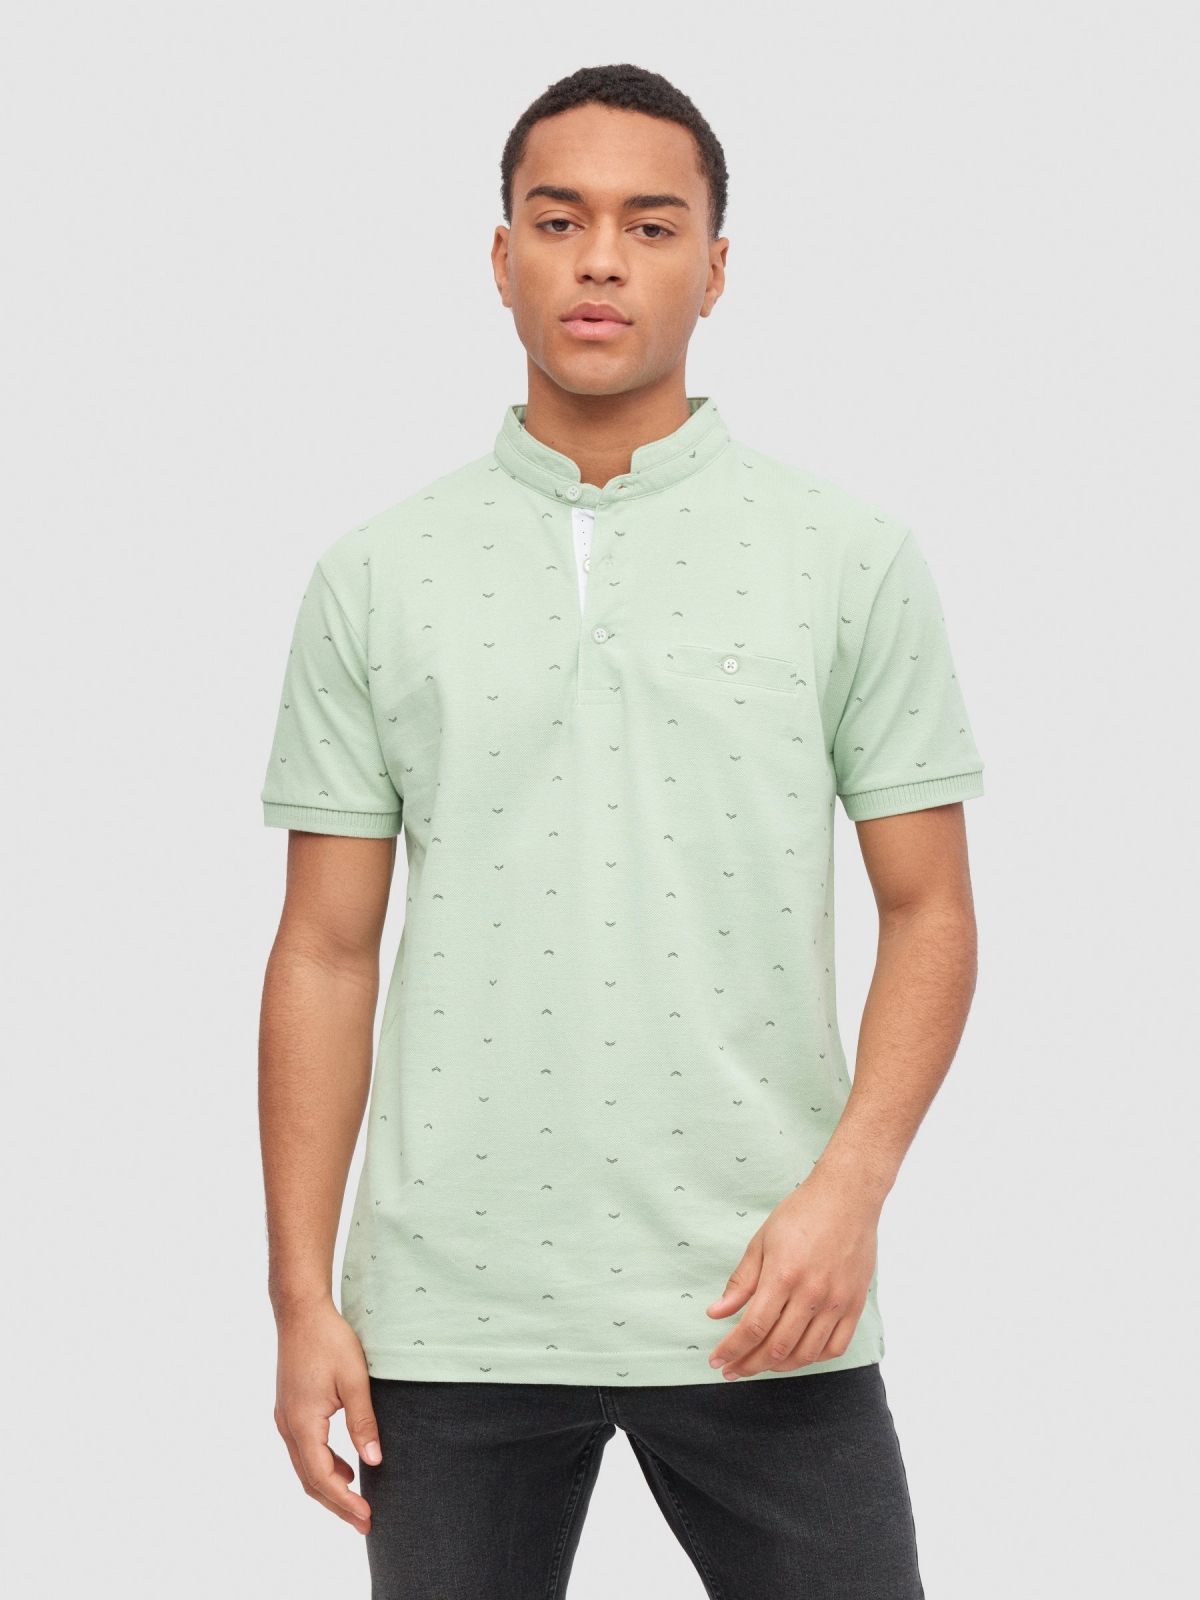 Minimal print polo mint middle front view